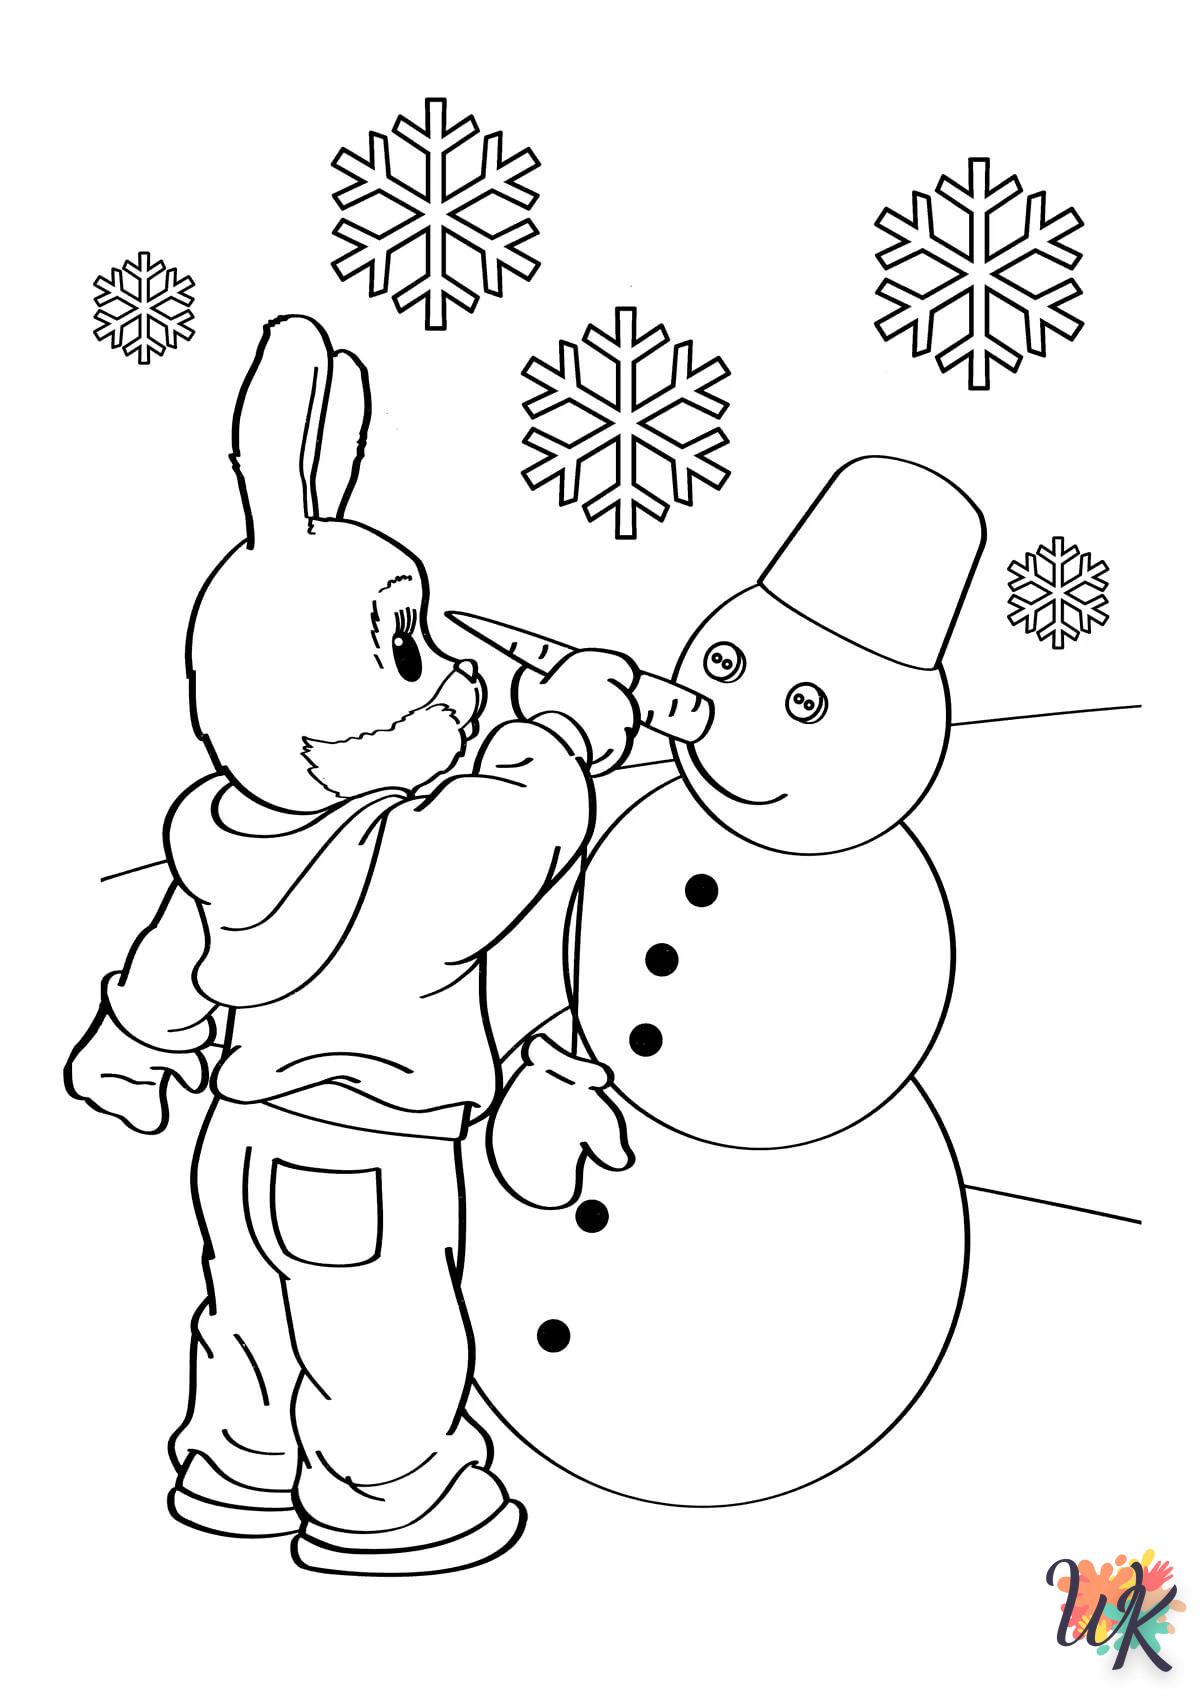 Snowman coloring online for 2 year old baby